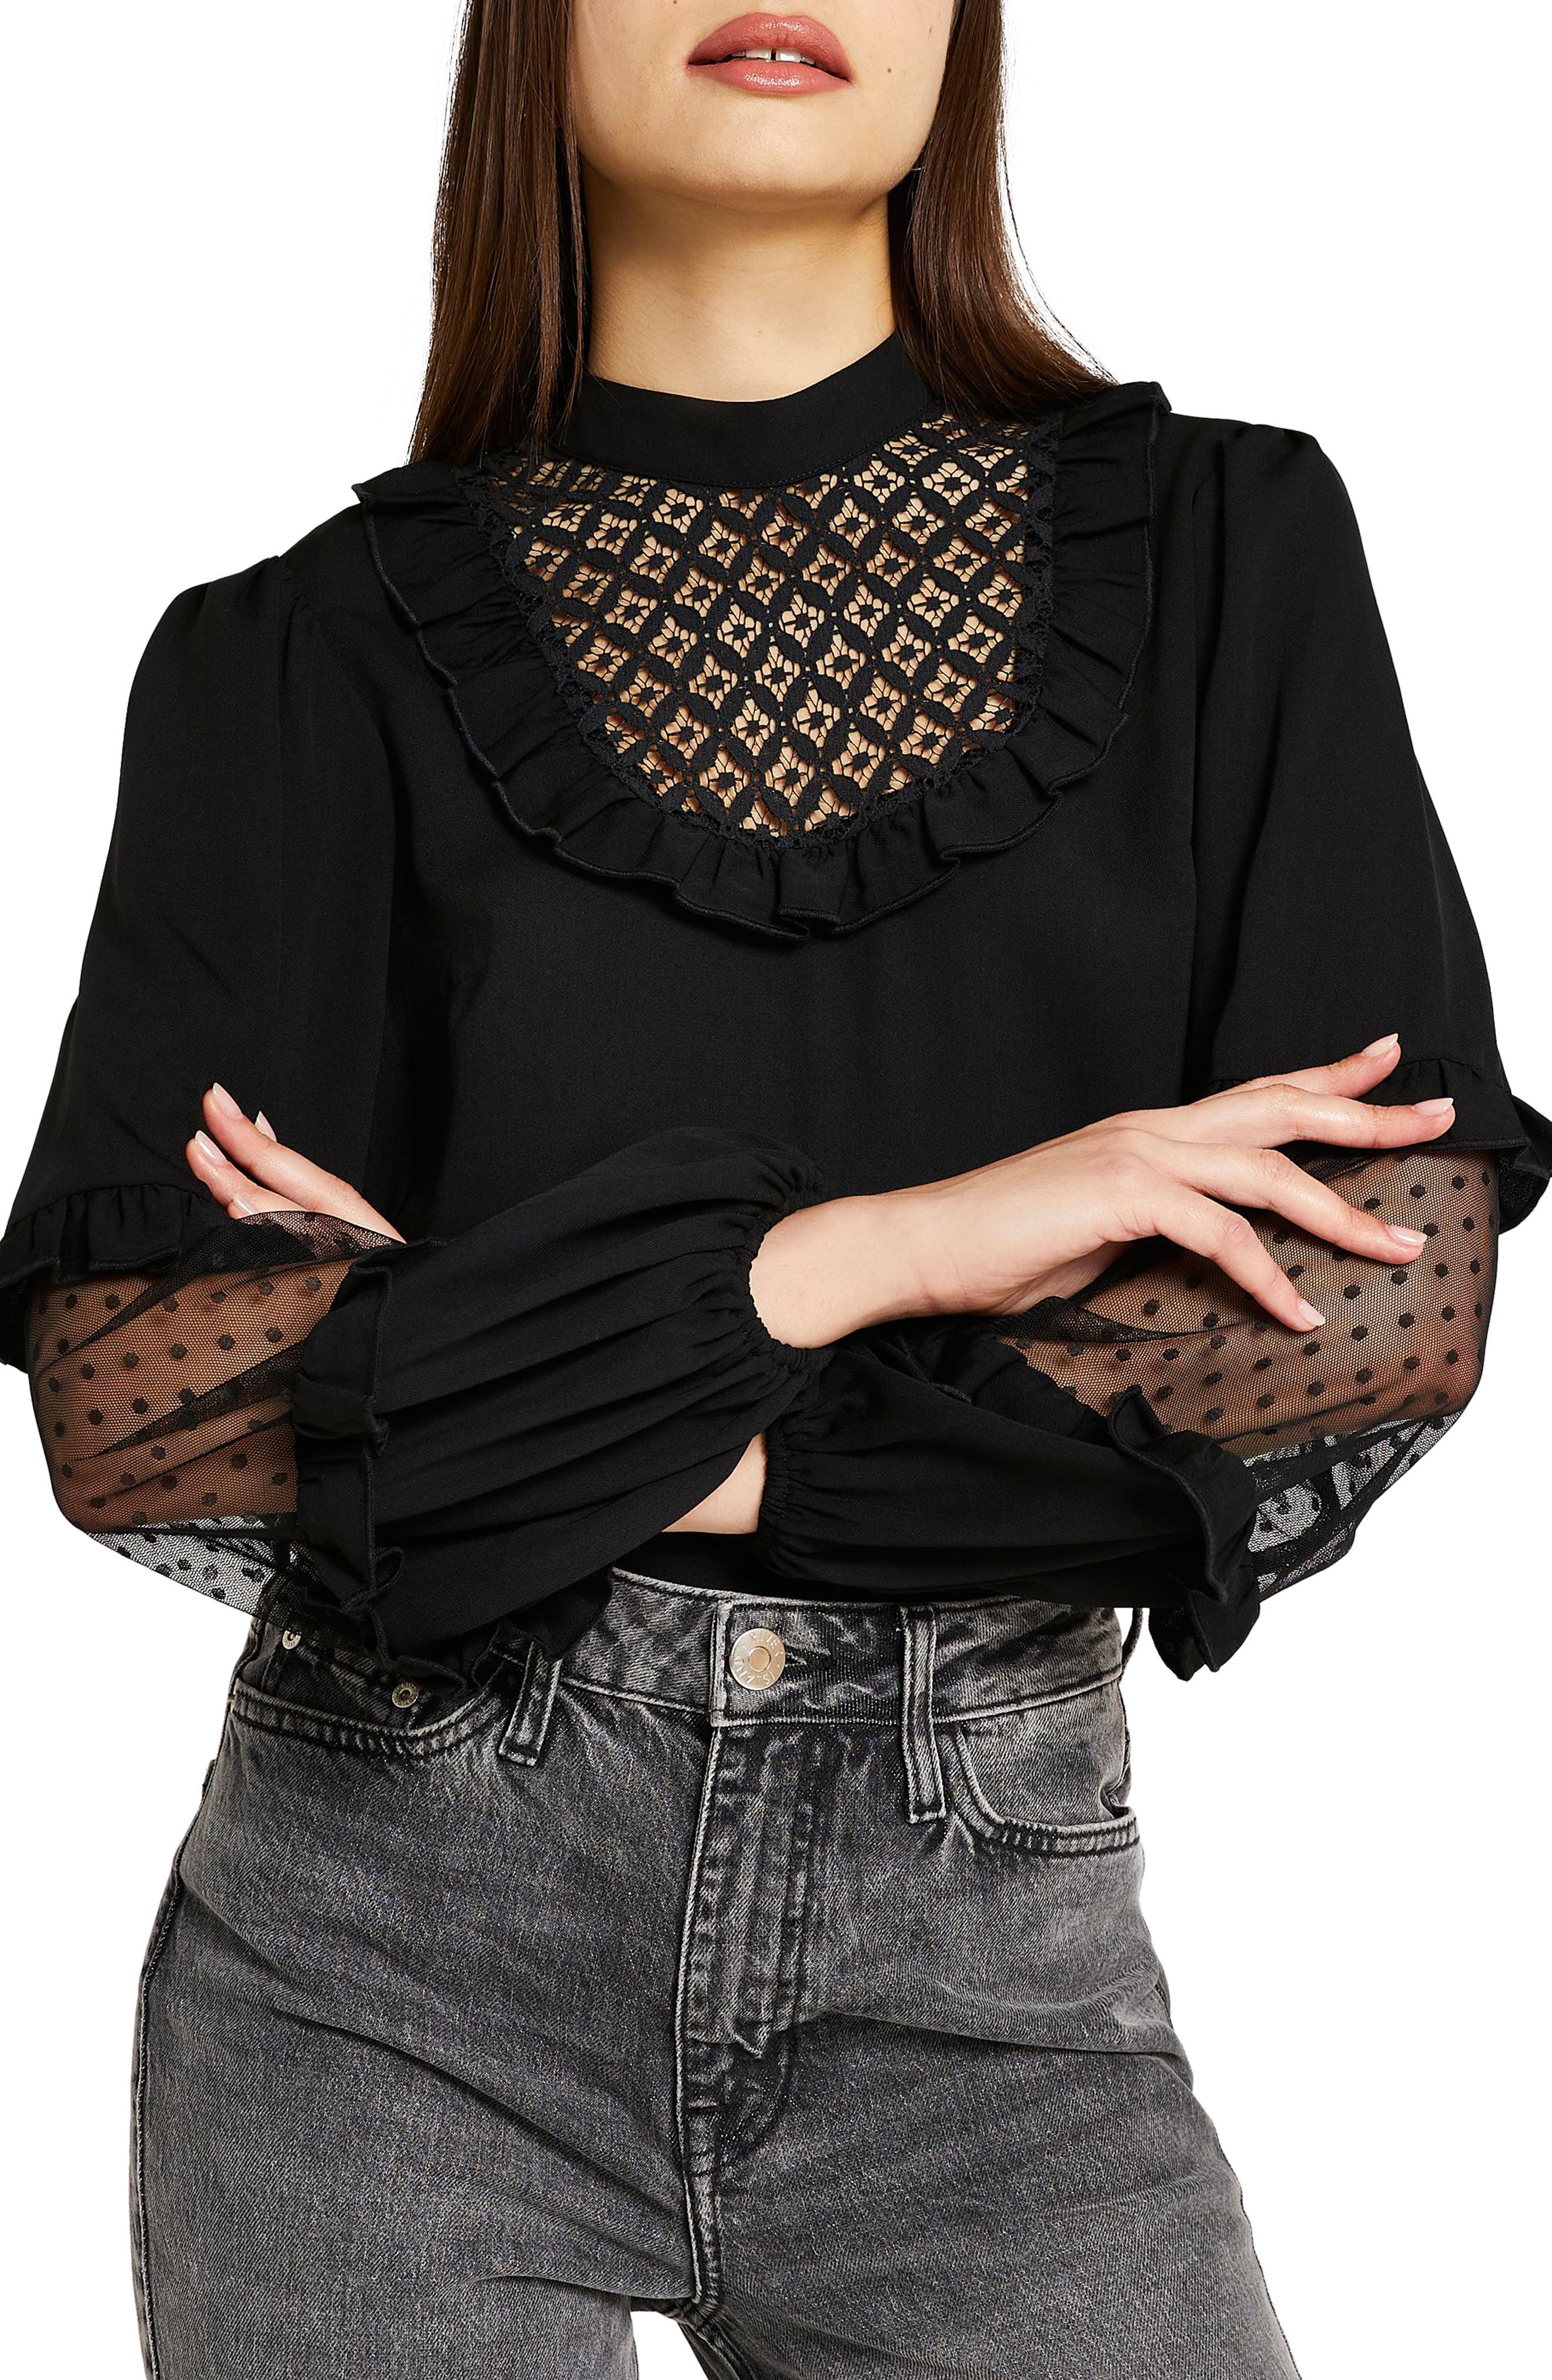 UPC 077838000090 product image for River Island Lace Bib Blouse in Black at Nordstrom, Size 2 Us | upcitemdb.com